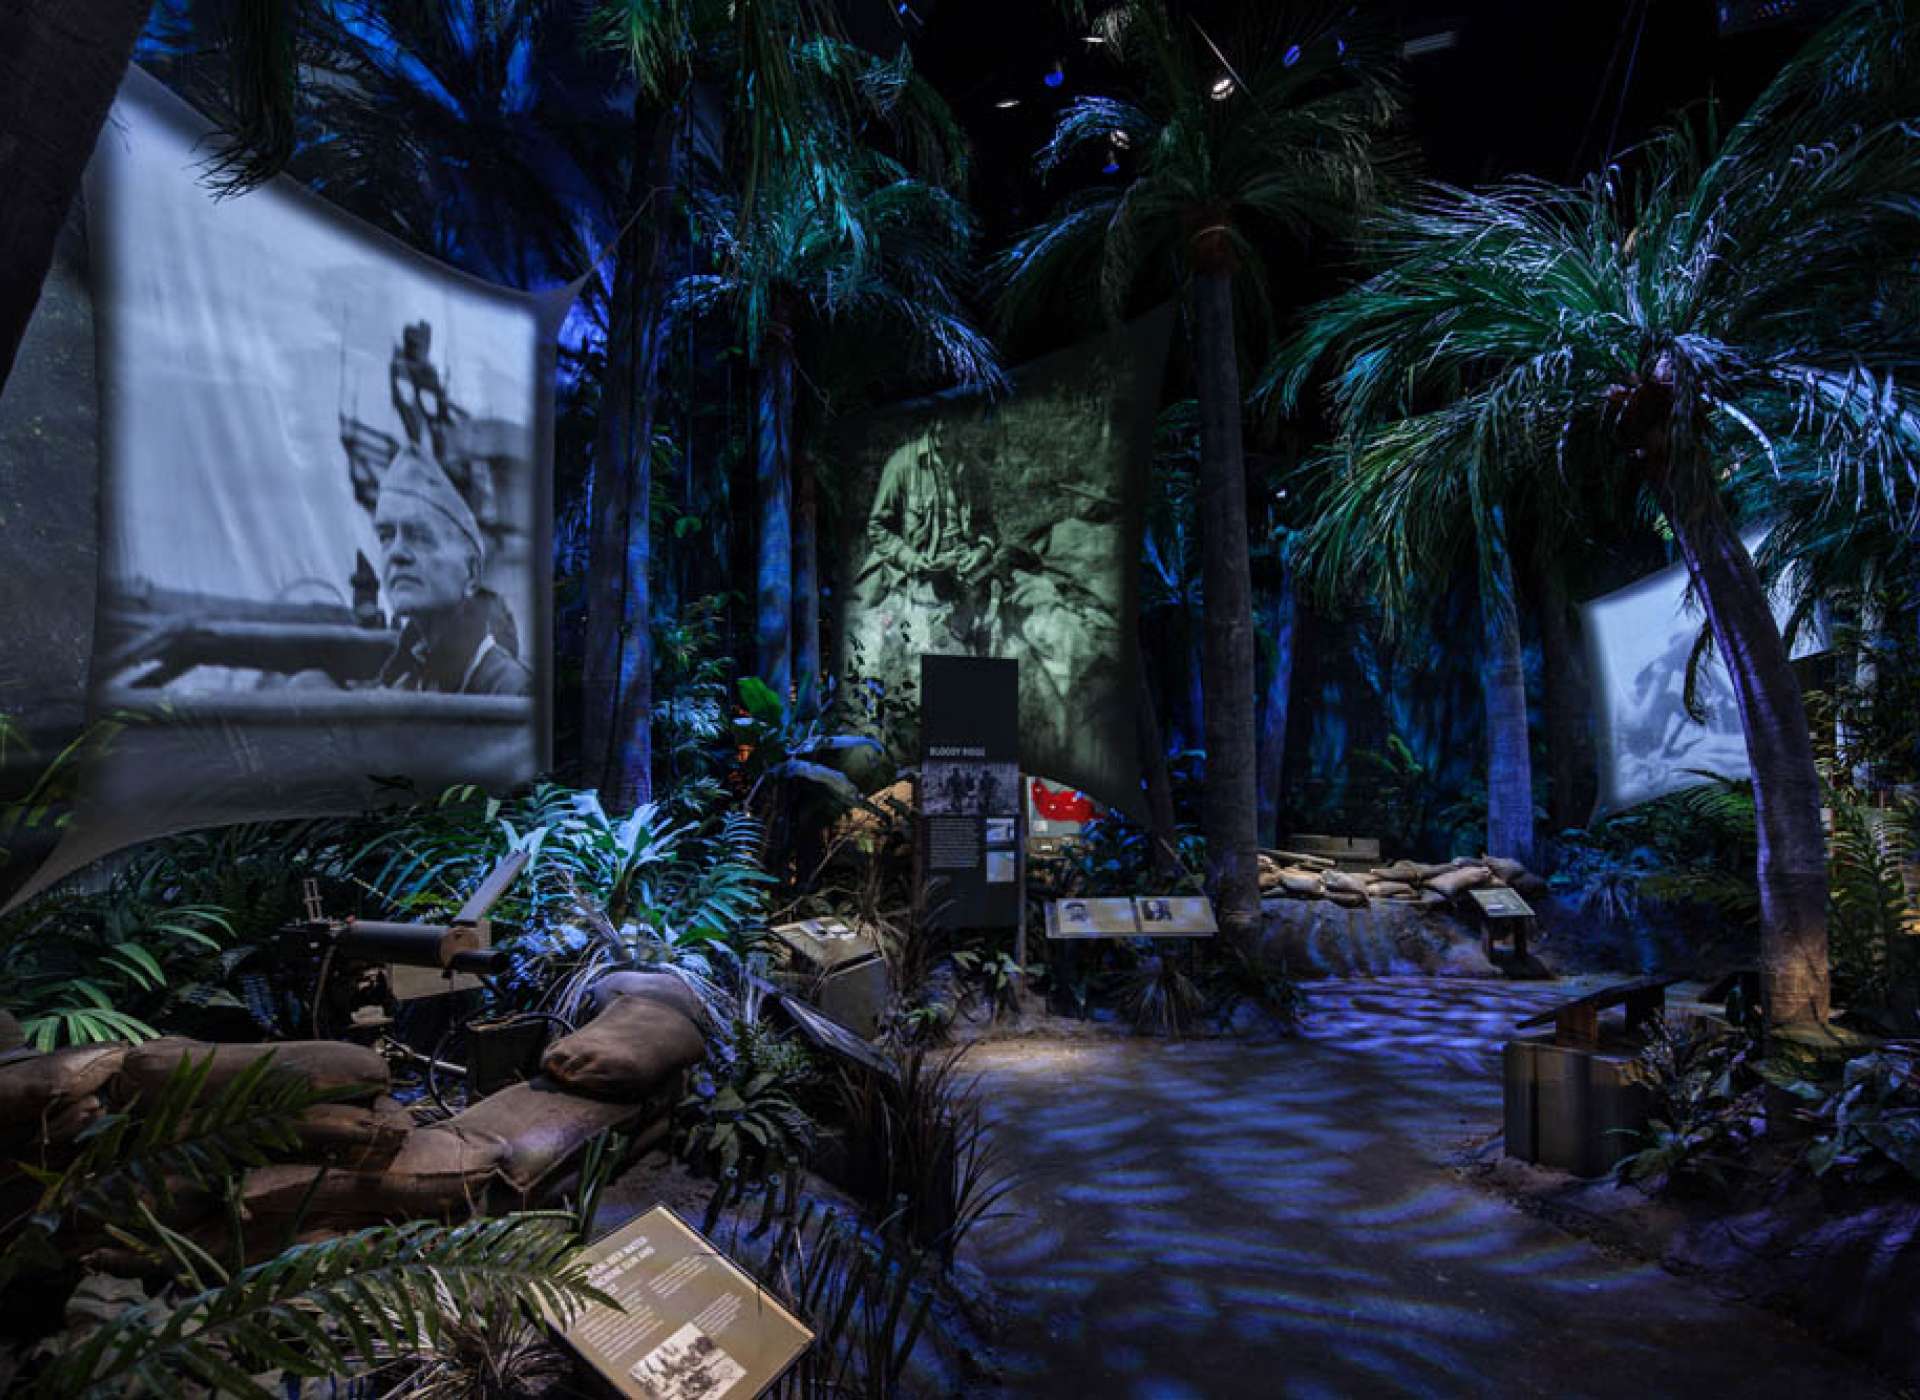 Guadalcanal: Green Hell Gallery in Road to Tokyo